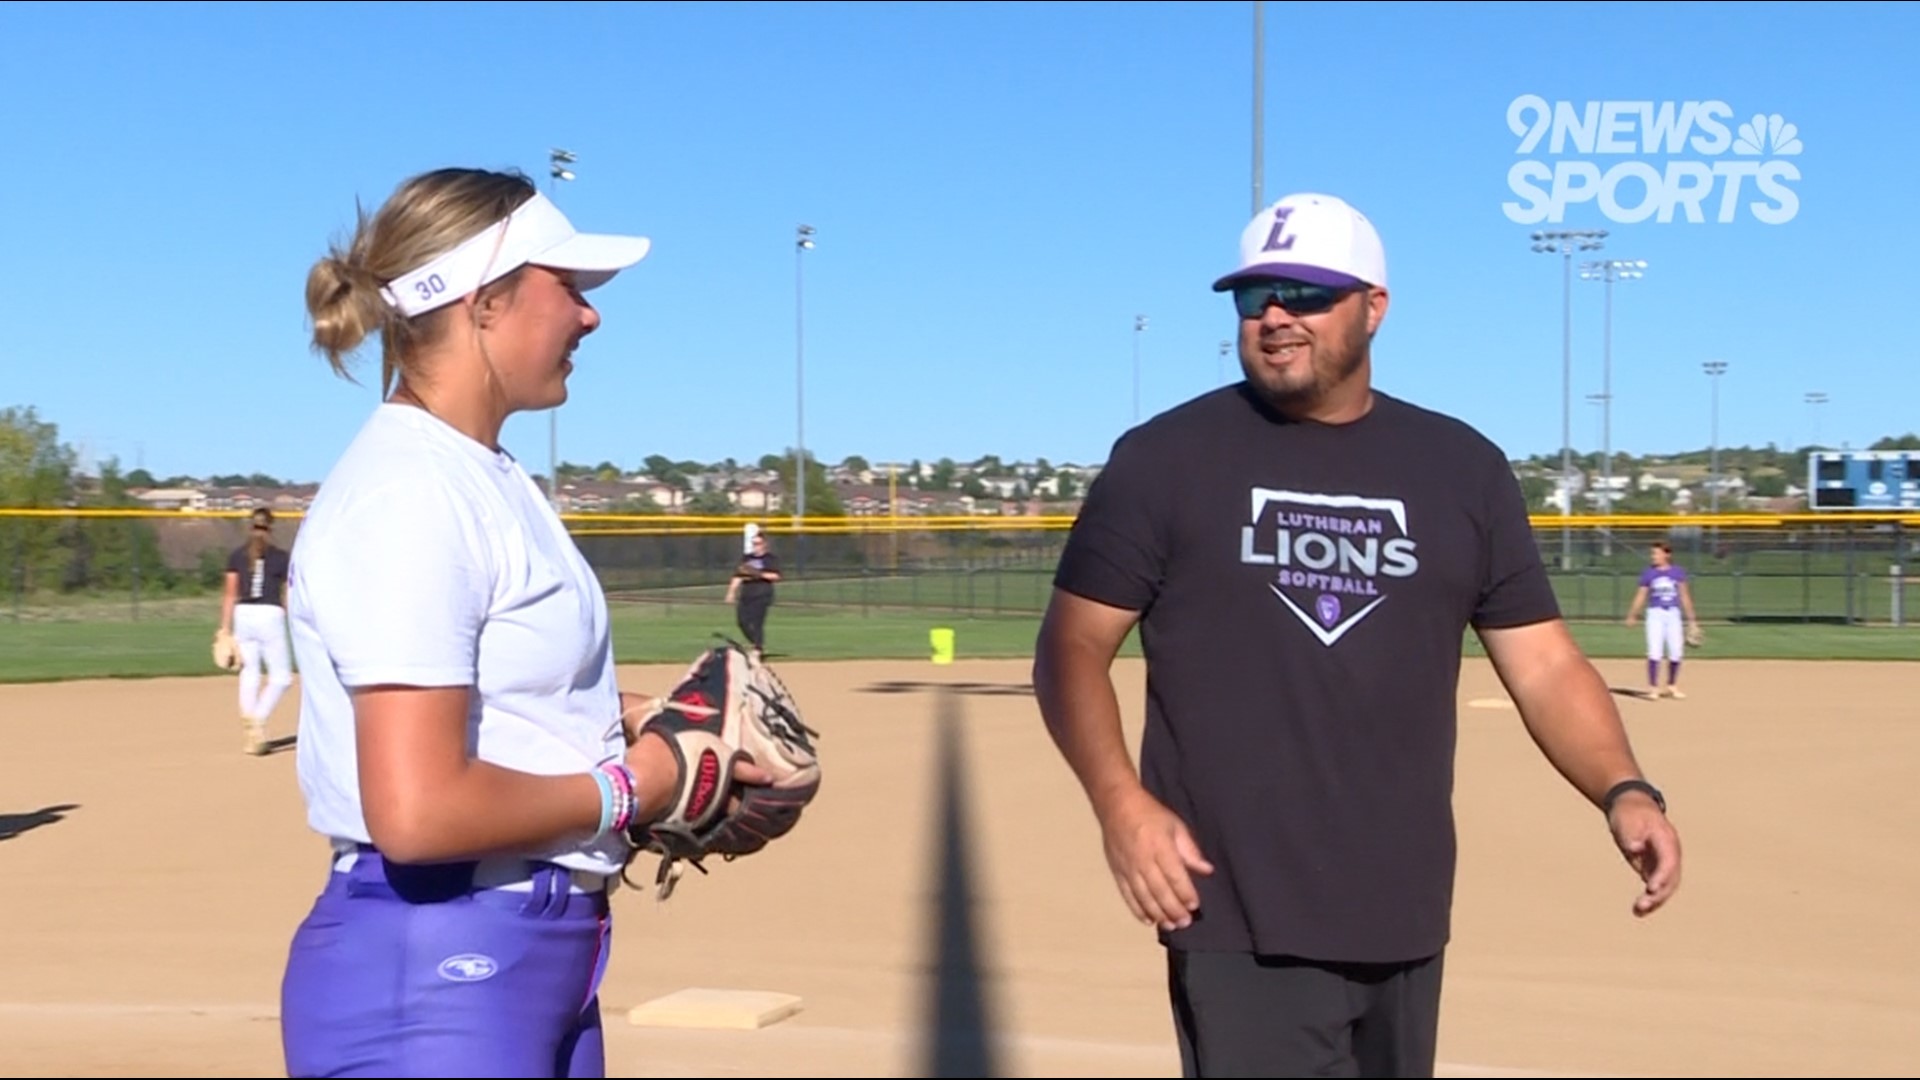 Hailey Maestretti has been playing under her dad since the age of 5 and now she enters her senior season and last under her father/head coach